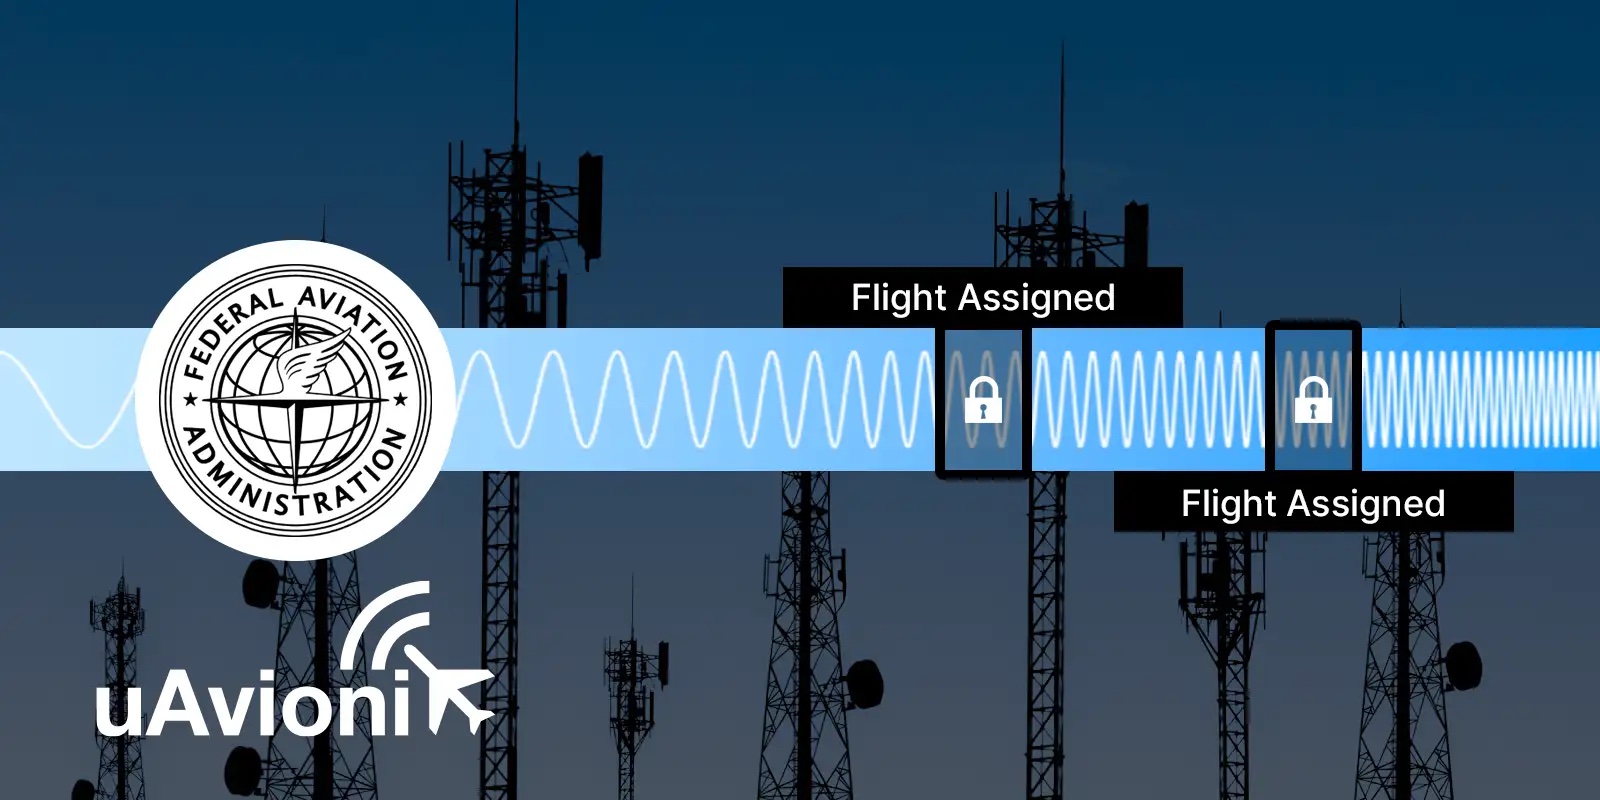 UAvionix Awarded FAA Contract to Demo C-Band Frequency Assignment Manager for Multiple UAS